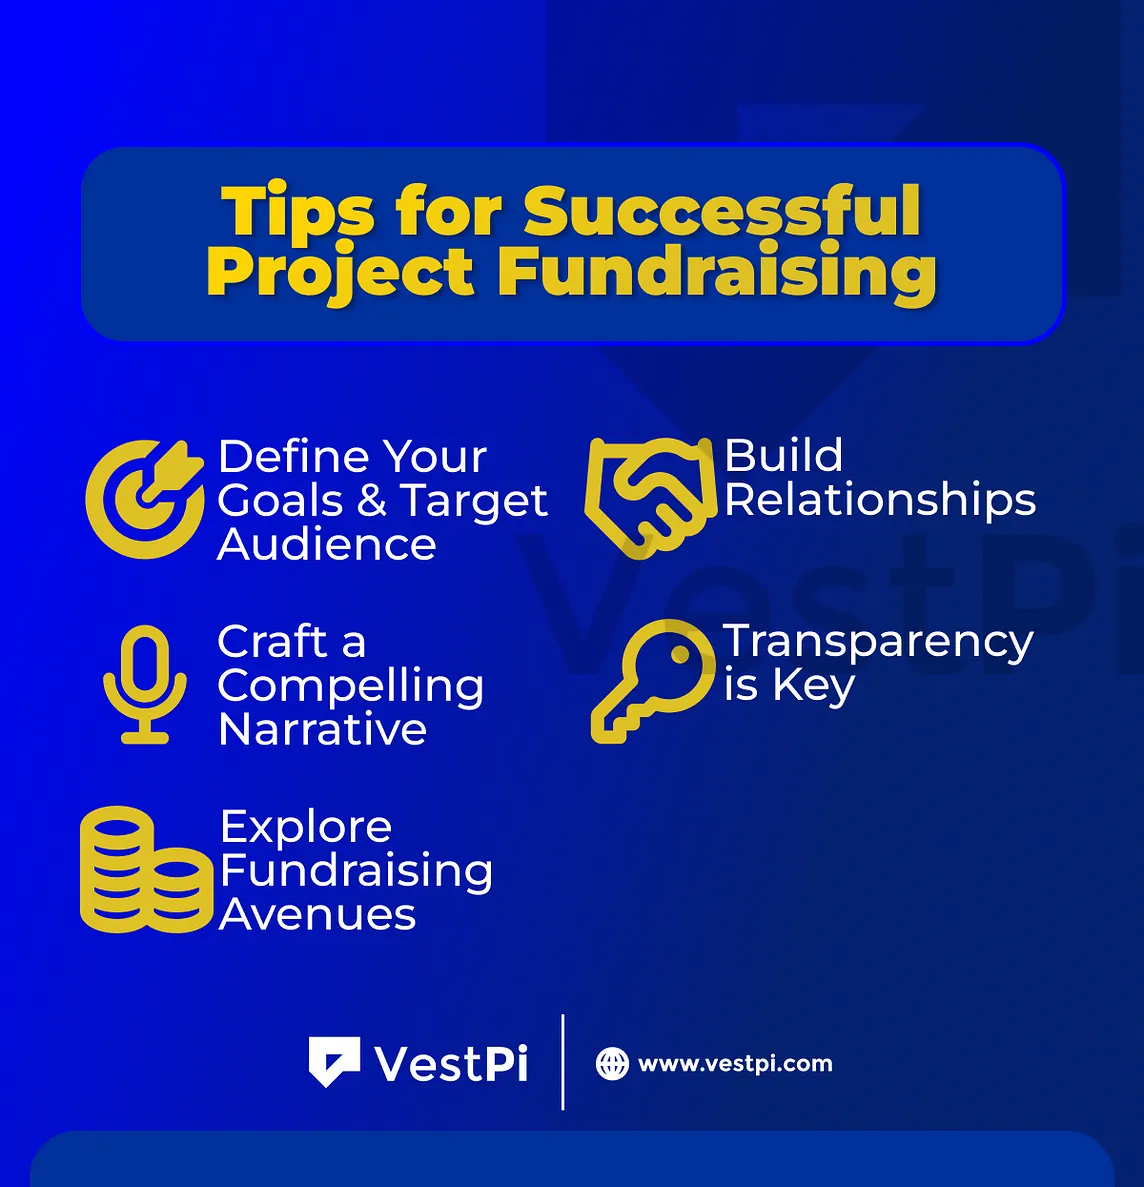 Tips for Successful Project Fundraising